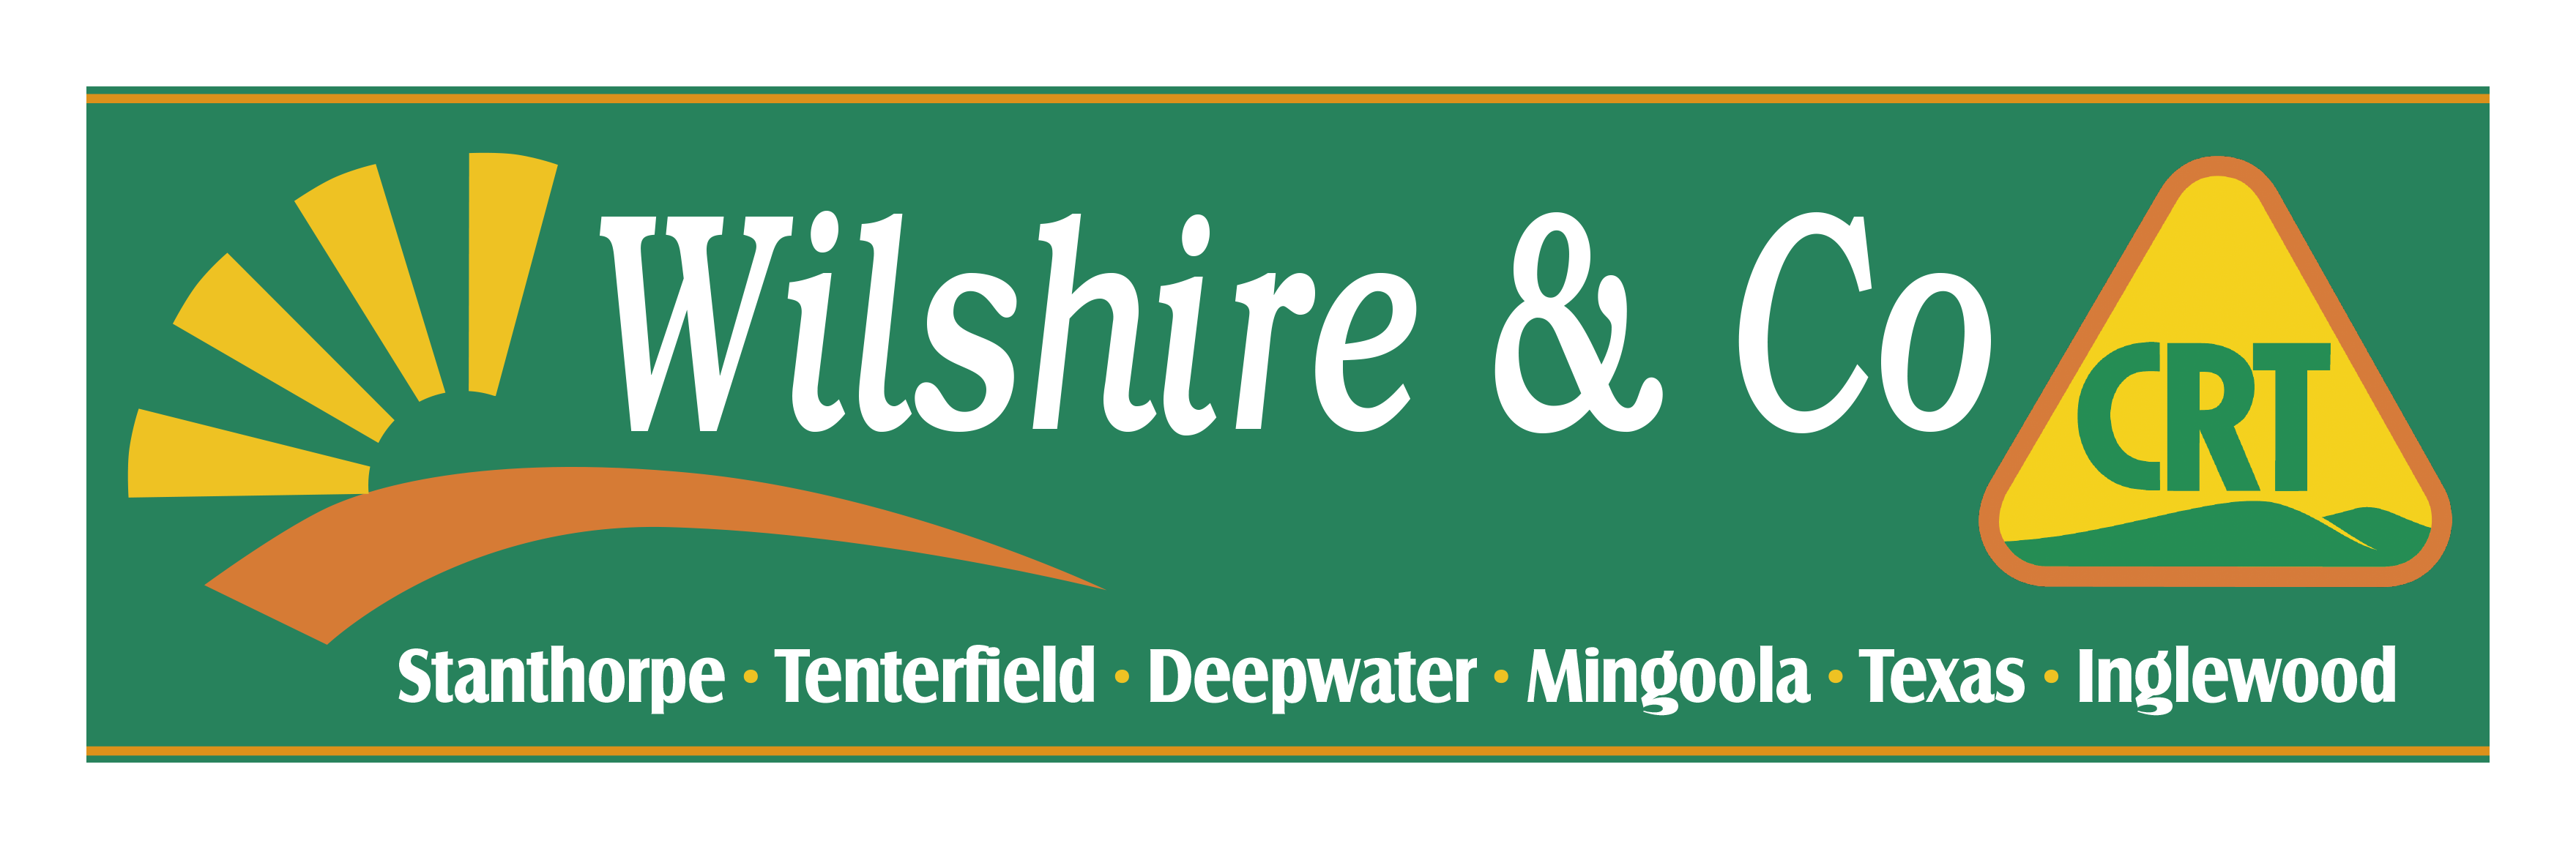 Find out more about Wilshire & Co - Agricultural Store in Tenterfield.